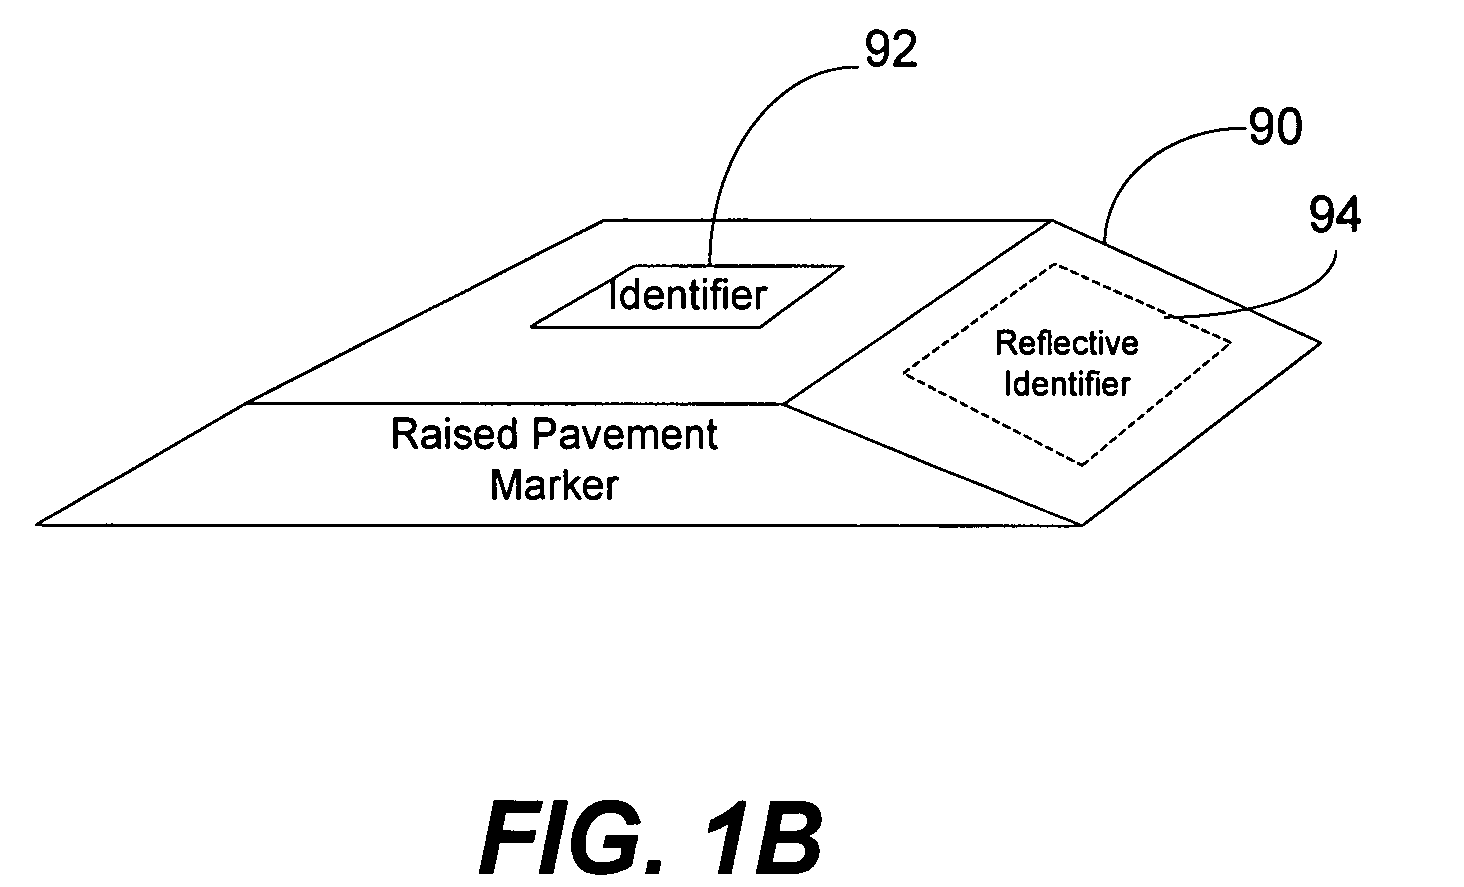 Highway safety system and method